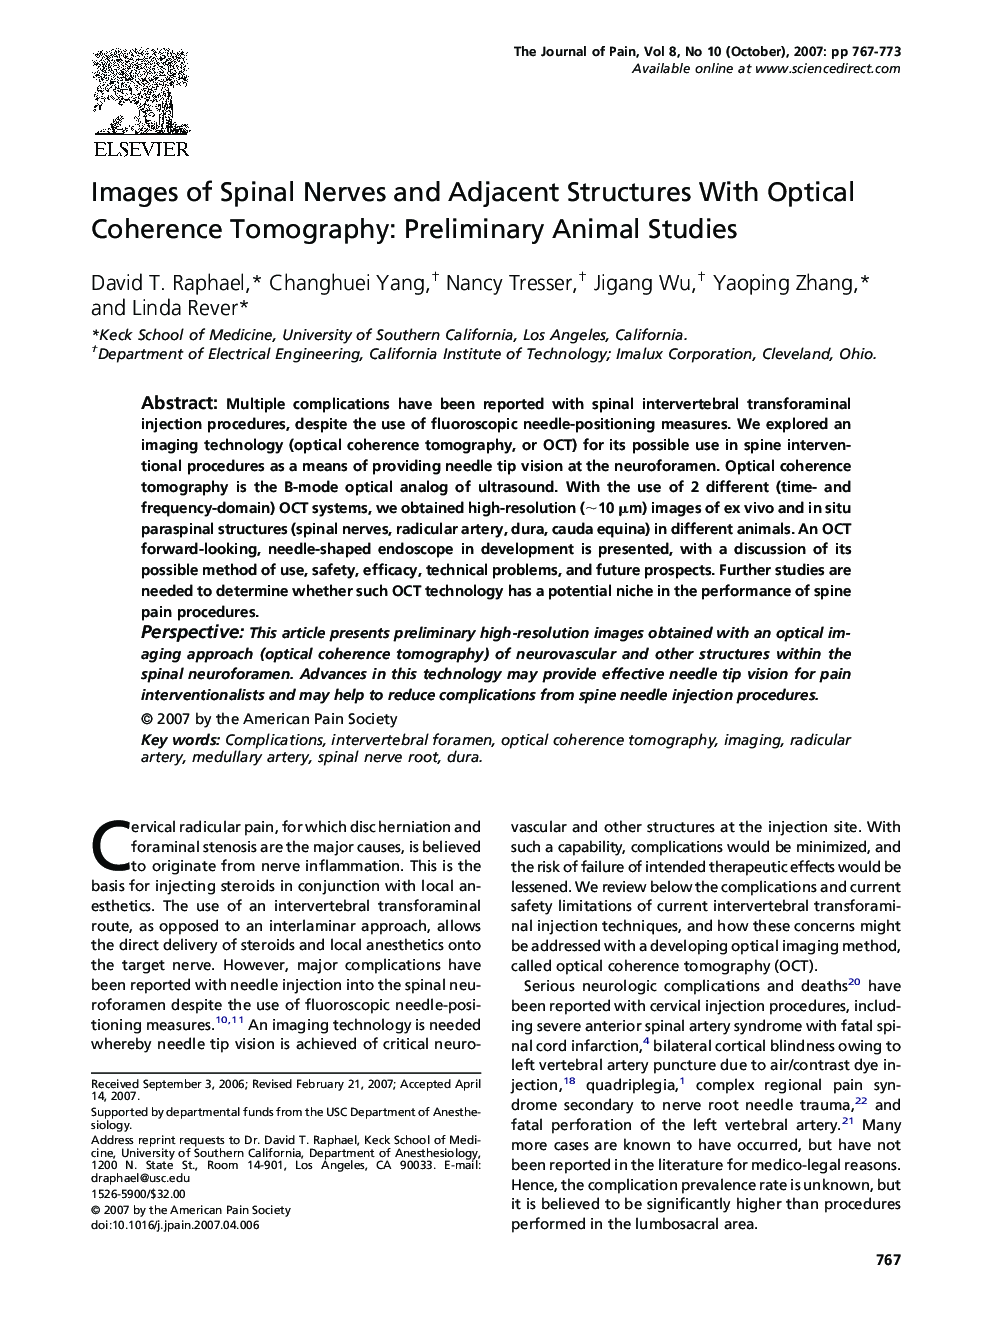 Images of Spinal Nerves and Adjacent Structures With Optical Coherence Tomography: Preliminary Animal Studies 